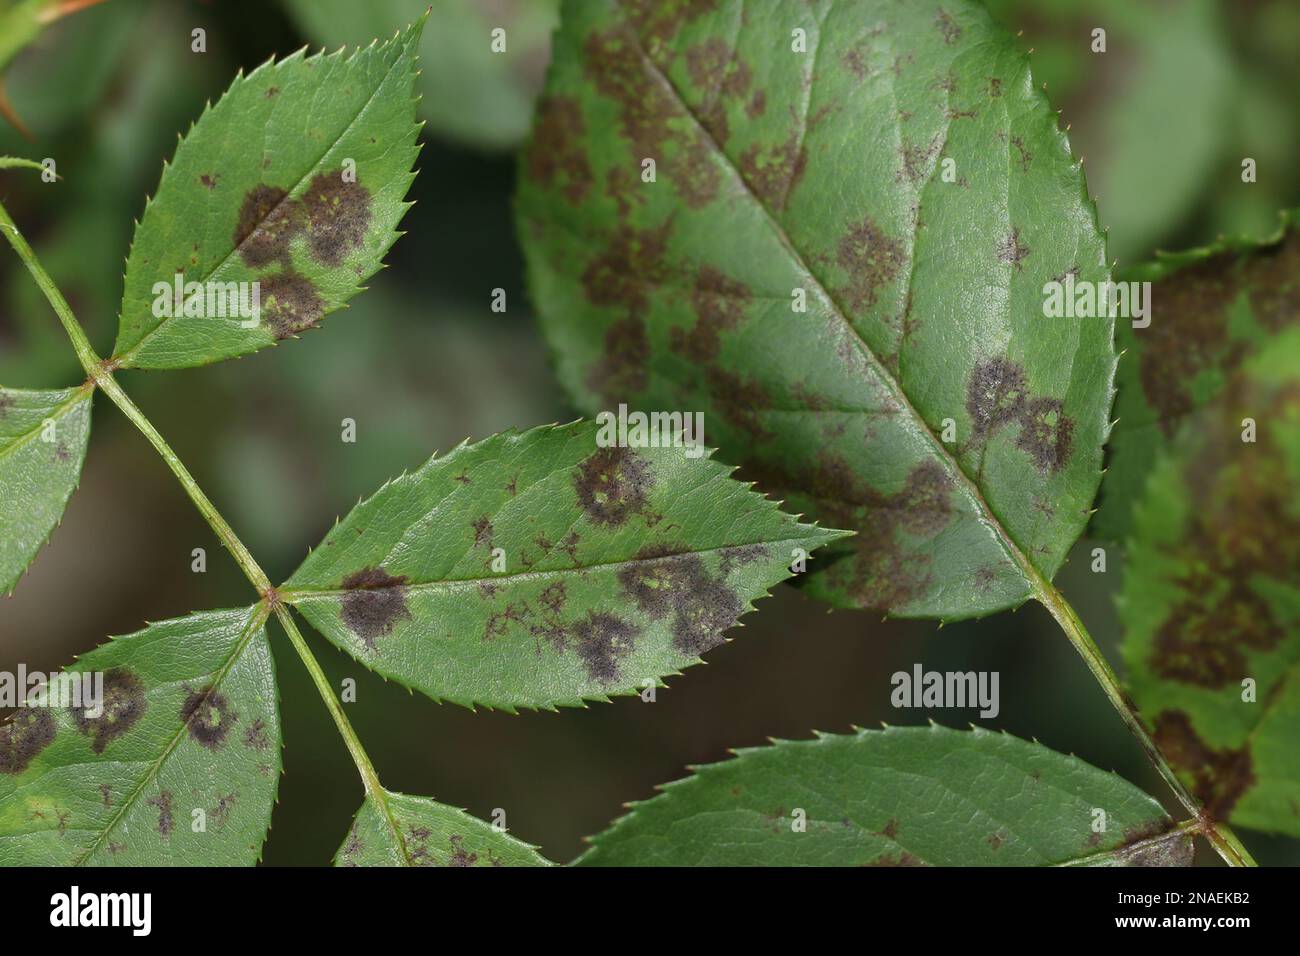 The rose black spot disease caused by the fungus Diplocarpon rosae. The black spots on the rose leaves are circular with a perforated edge. Damaged ro Stock Photo